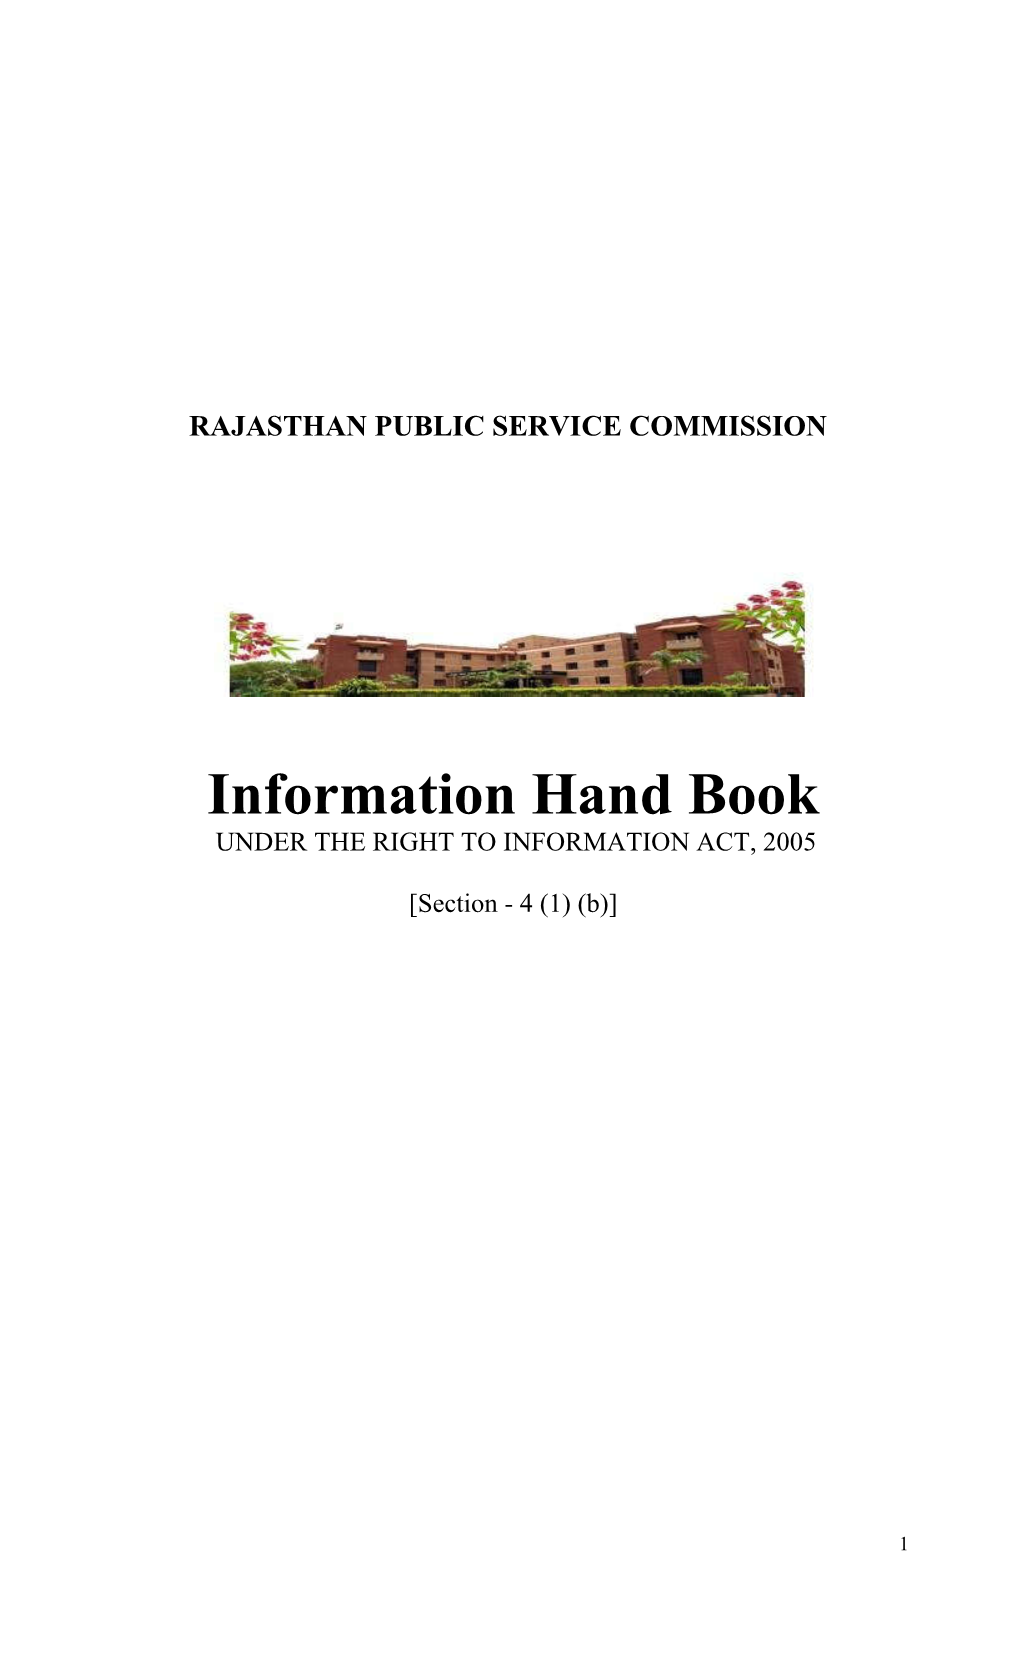 Information Hand Book UNDER the RIGHT to INFORMATION ACT, 2005